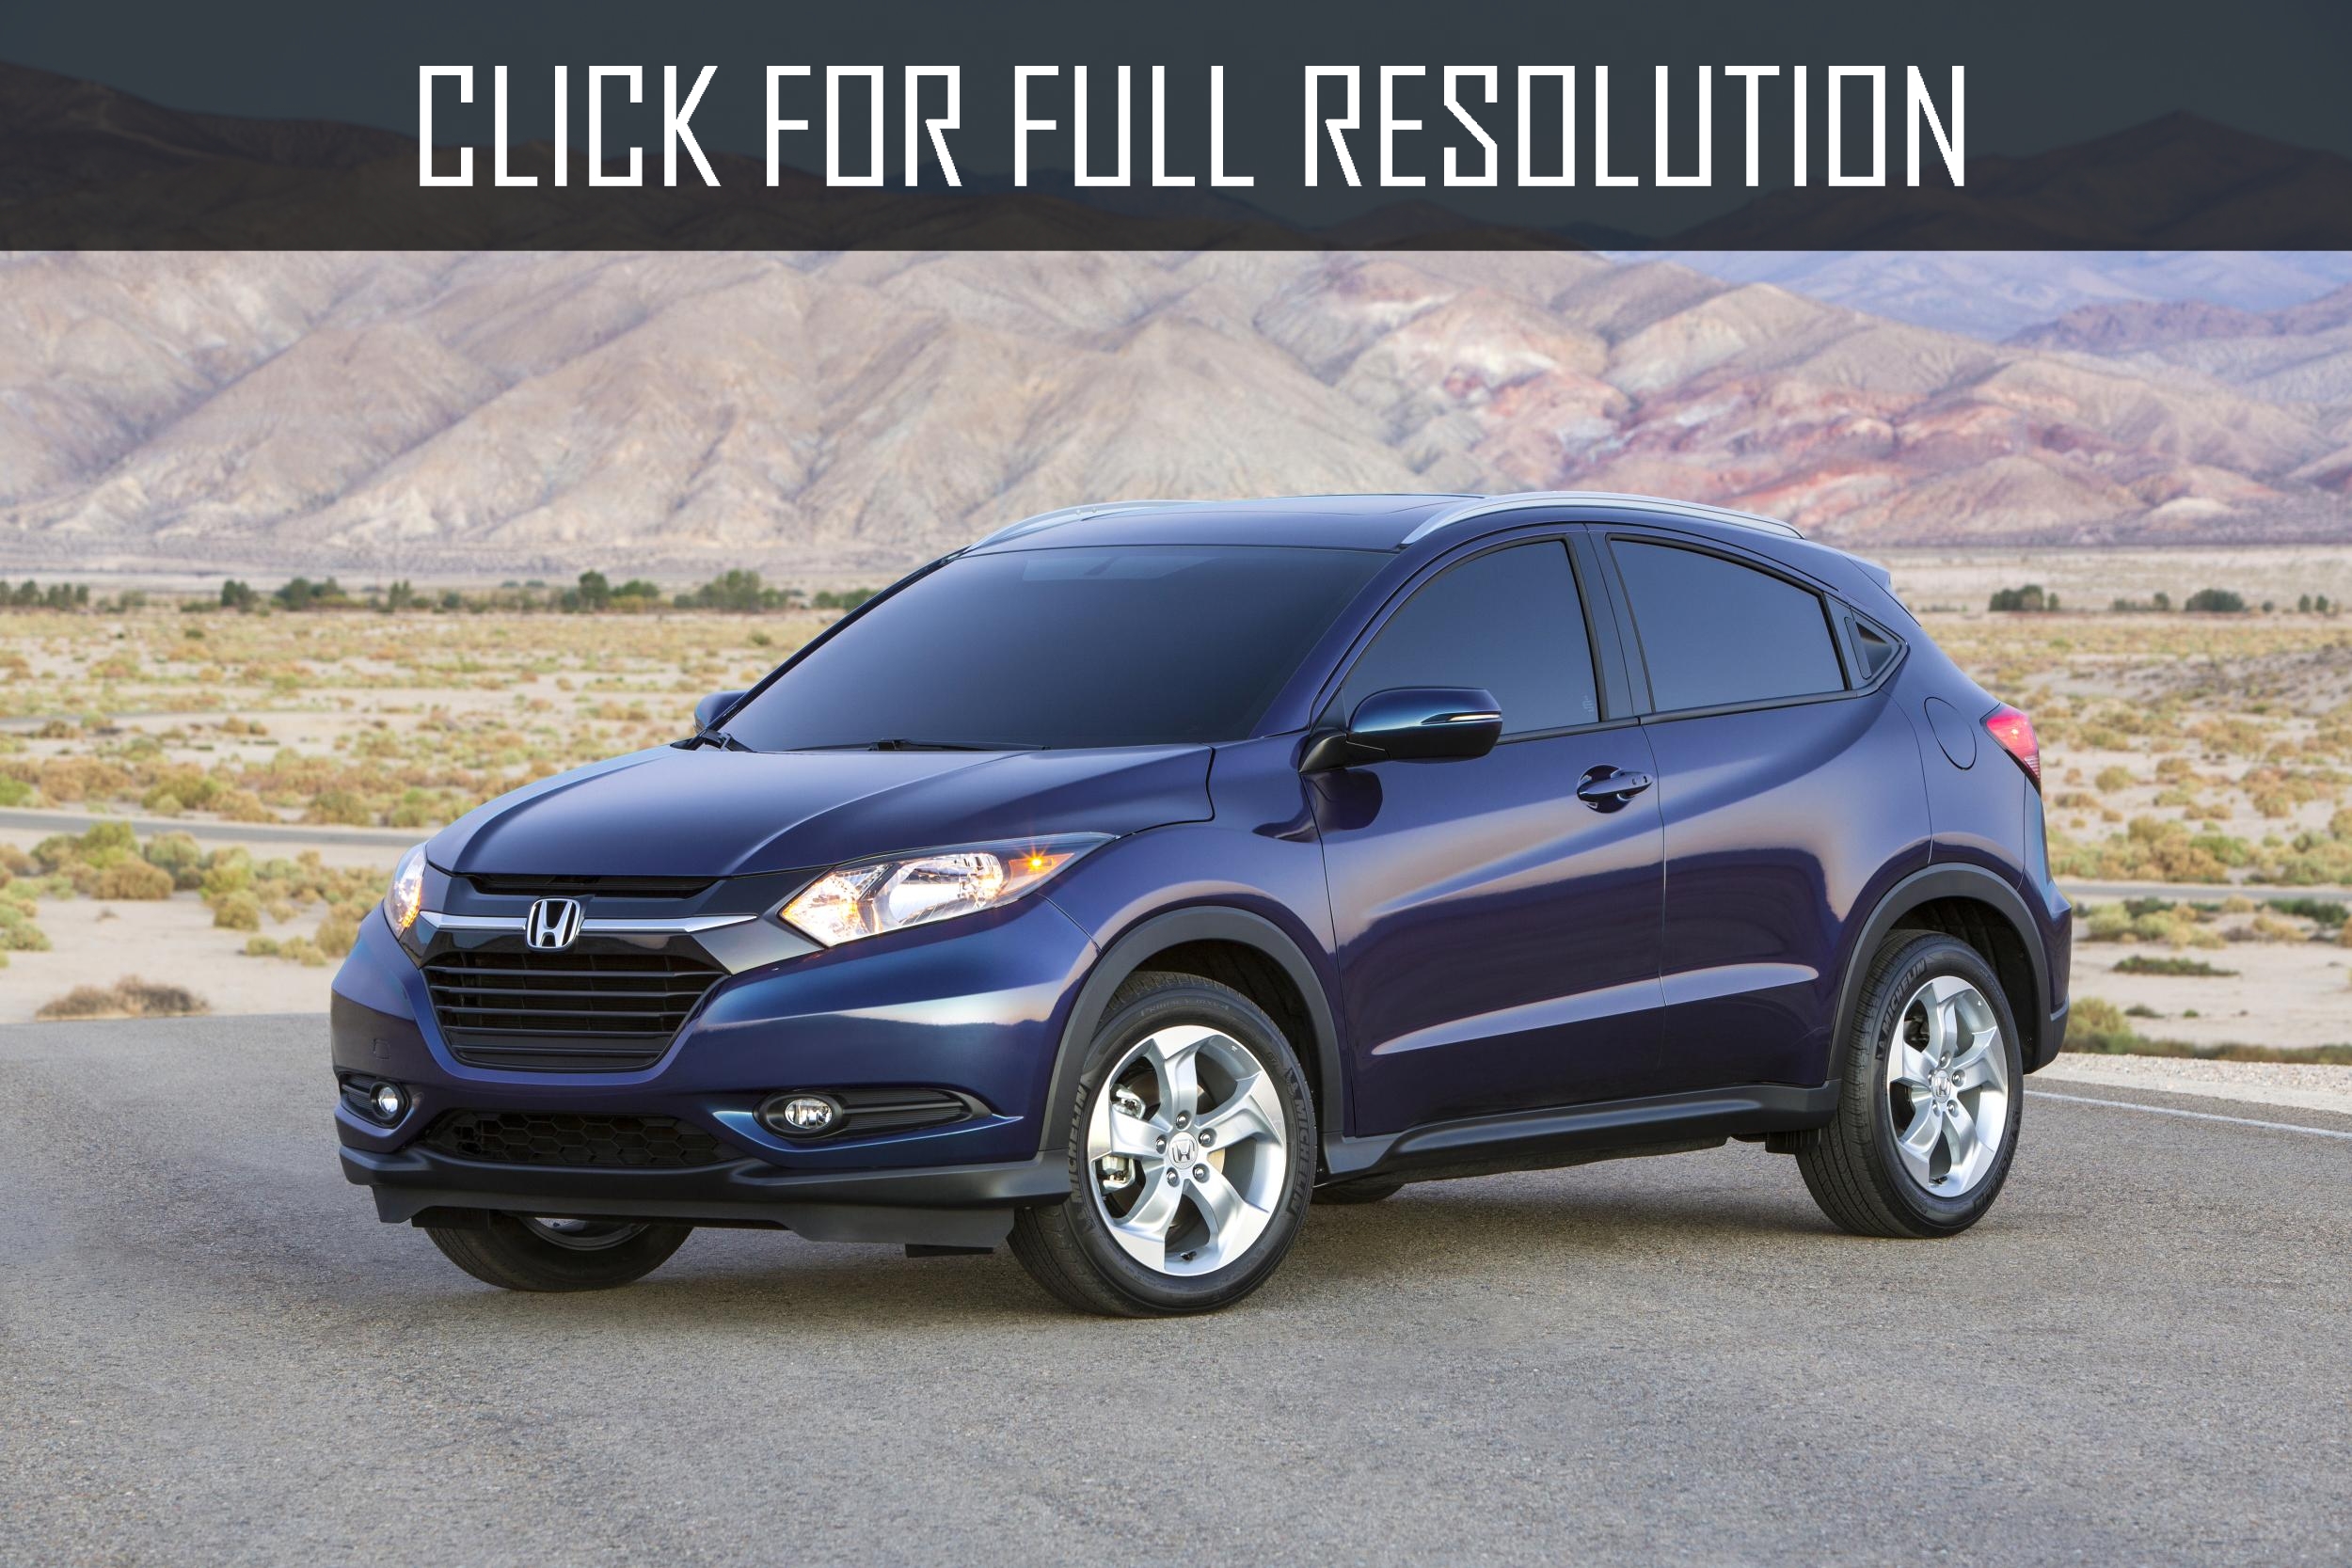 Honda HRV Blue reviews, prices, ratings with various photos